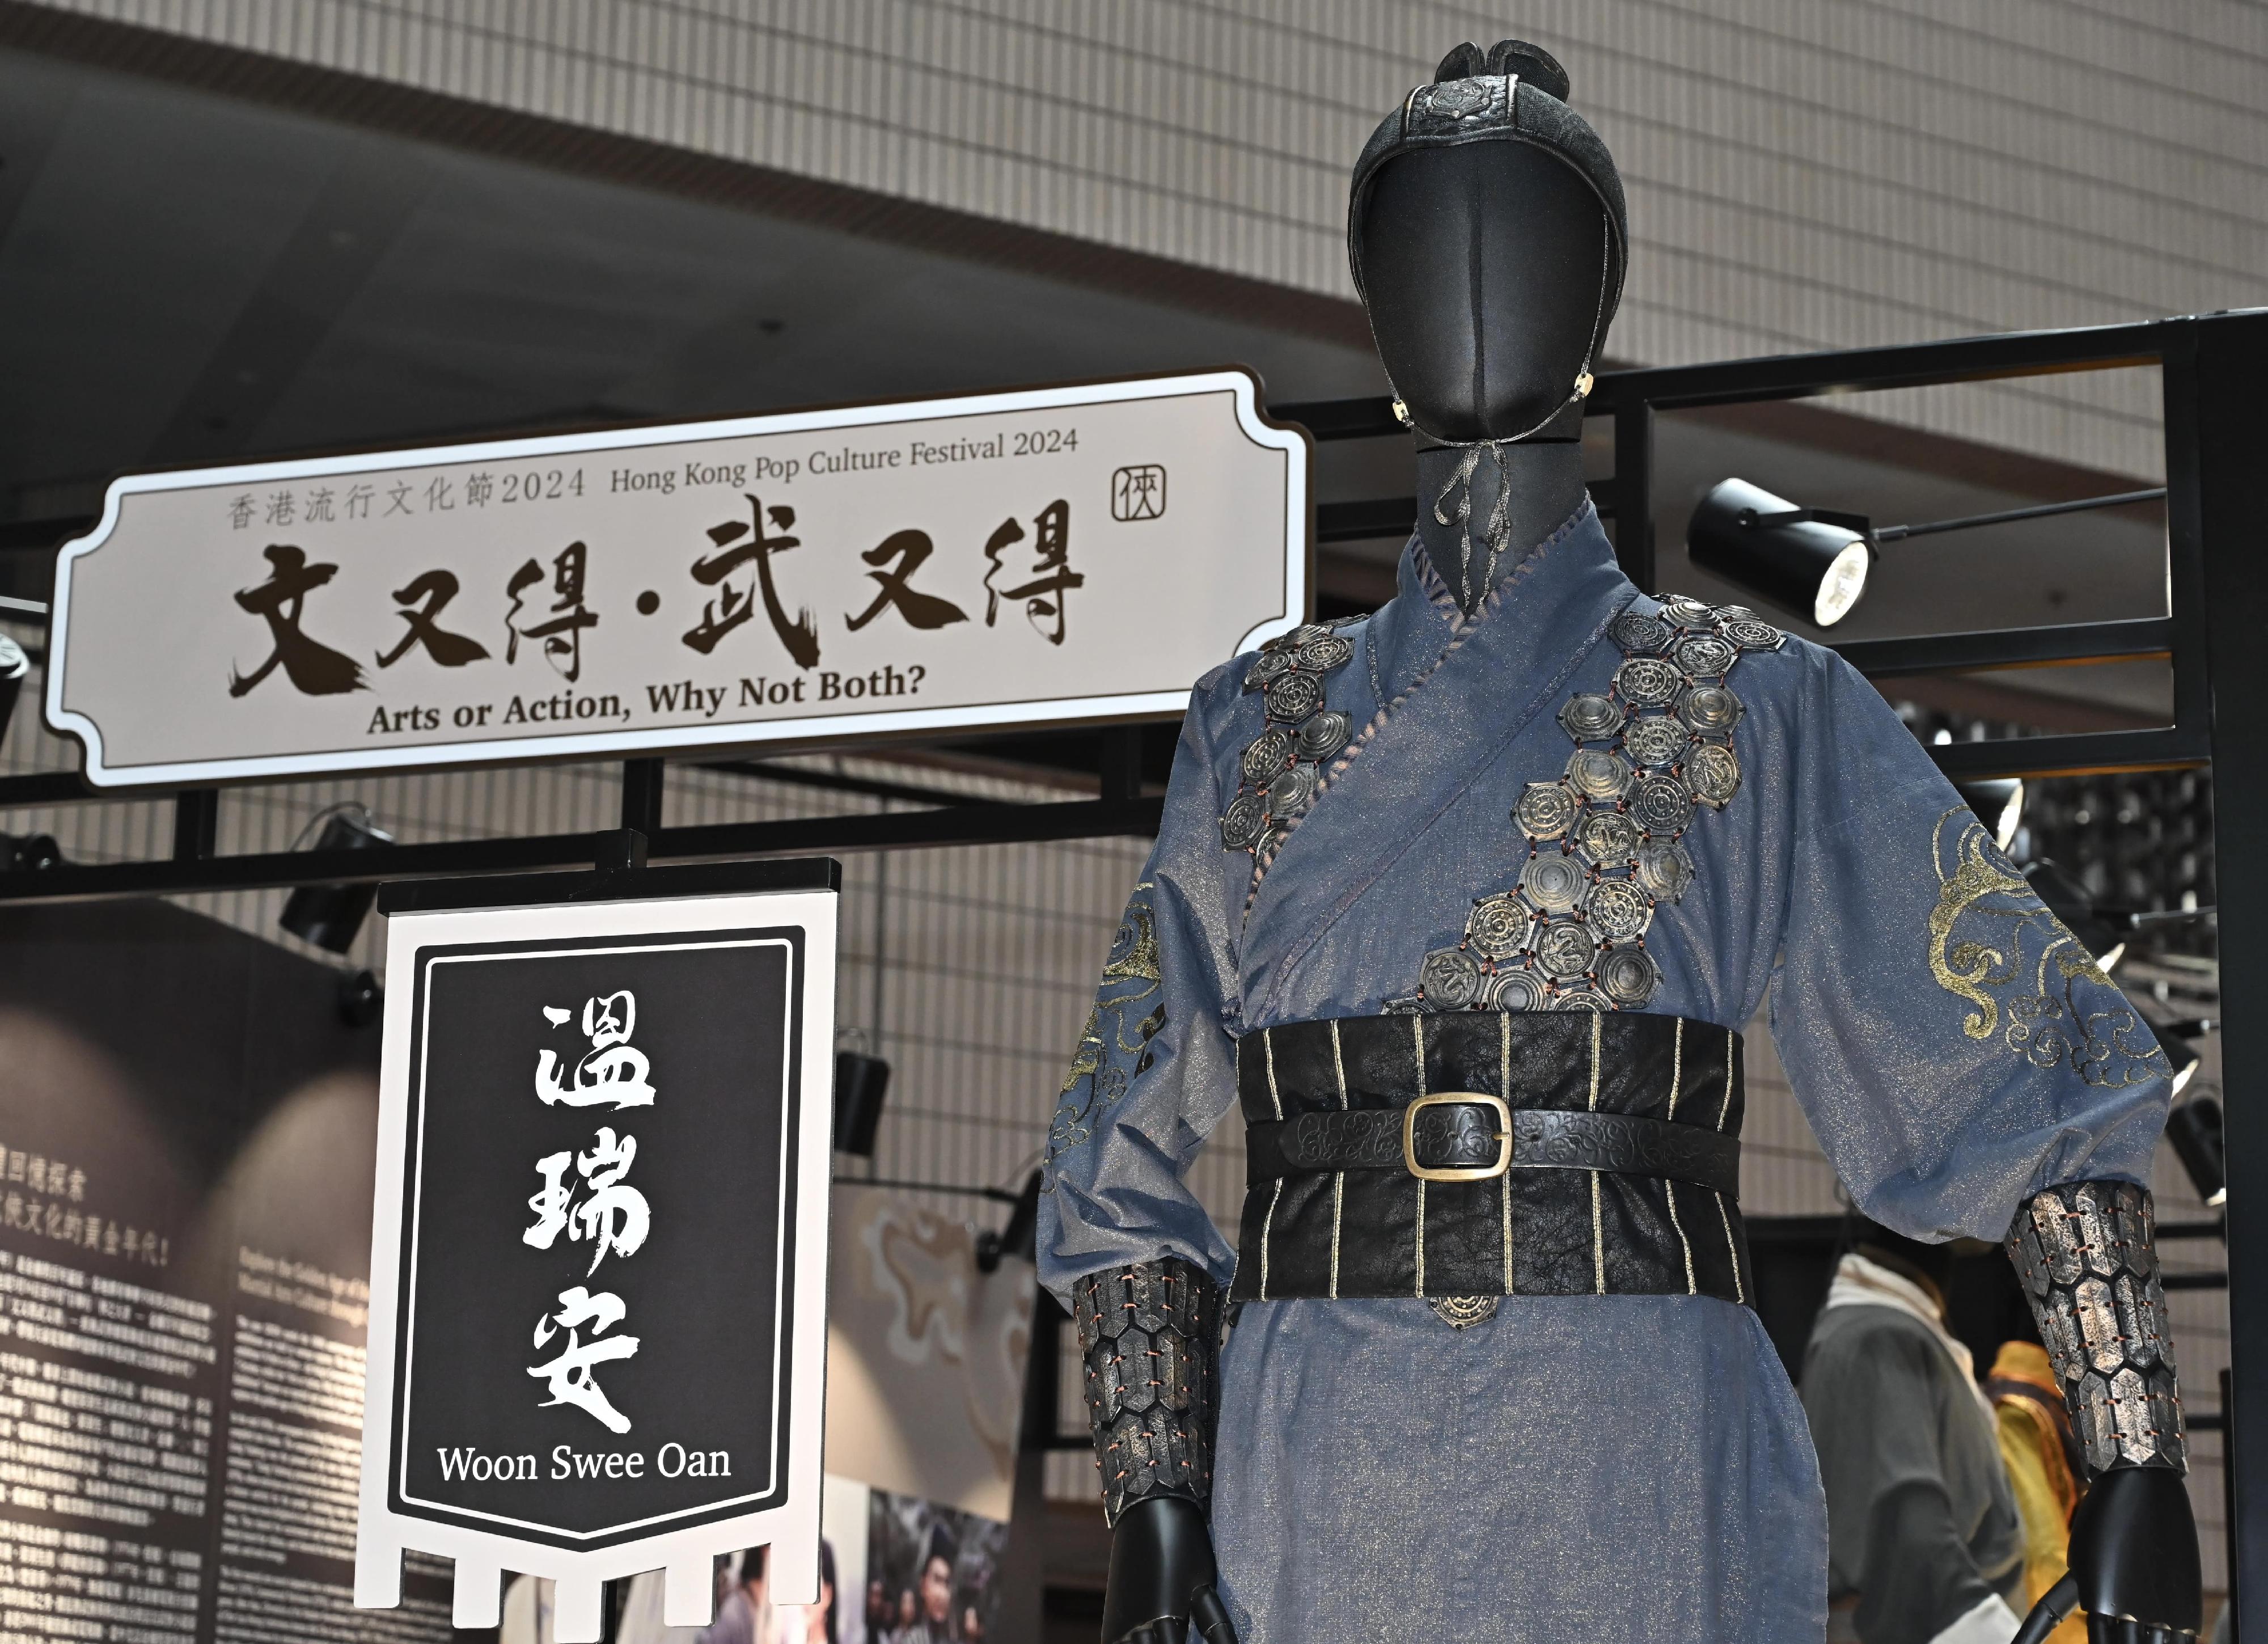 To tie in with its theme "Arts and Action", the second Hong Kong Pop Culture Festival is running a vast range of programmes inspired by martial arts novels. Among them is the "Classic Martial Arts Drama Costumes and Props Exhibition" under the "Arts or Action, Why Not Both?" series, which opened today (April 17) at the foyer of the Hong Kong Cultural Centre. Photo shows the costume of Leng Lingqi in "The Four".
